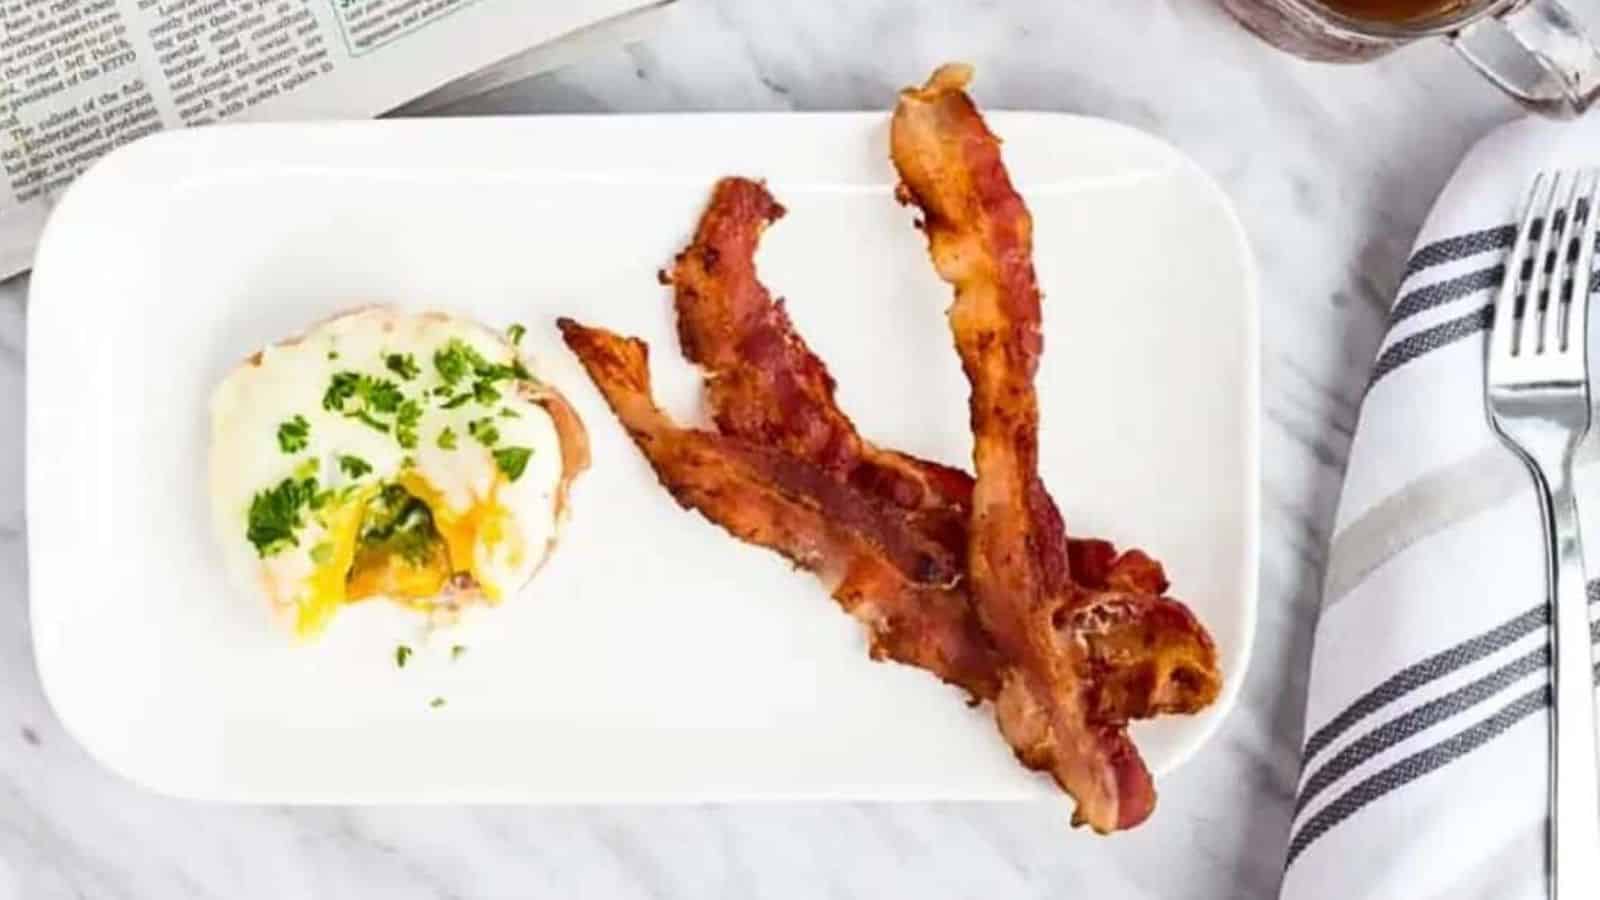 Bacon and eggs on a plate with a cup of coffee.